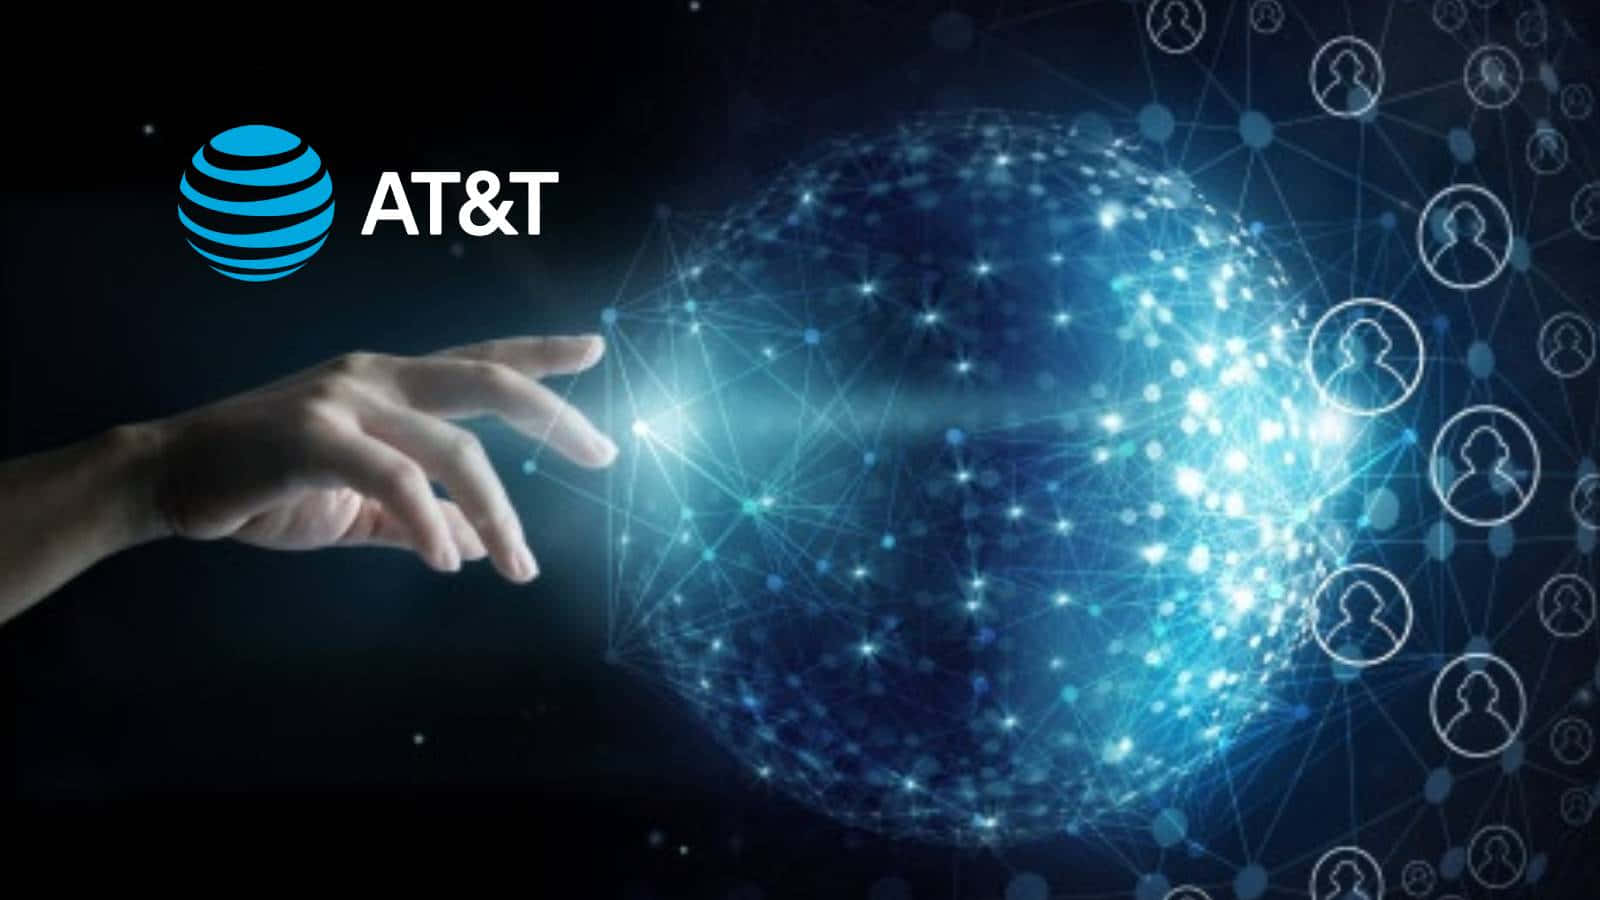 Free download ATT Refresh Wallpaper by tempest790 on [480x800] for your  Desktop, Mobile & Tablet | Explore 46+ AT&T Wallpapers | AT&T Stadium  Wallpaper, AT&T Phone Wallpaper, AT&T Wallpaper Downloads